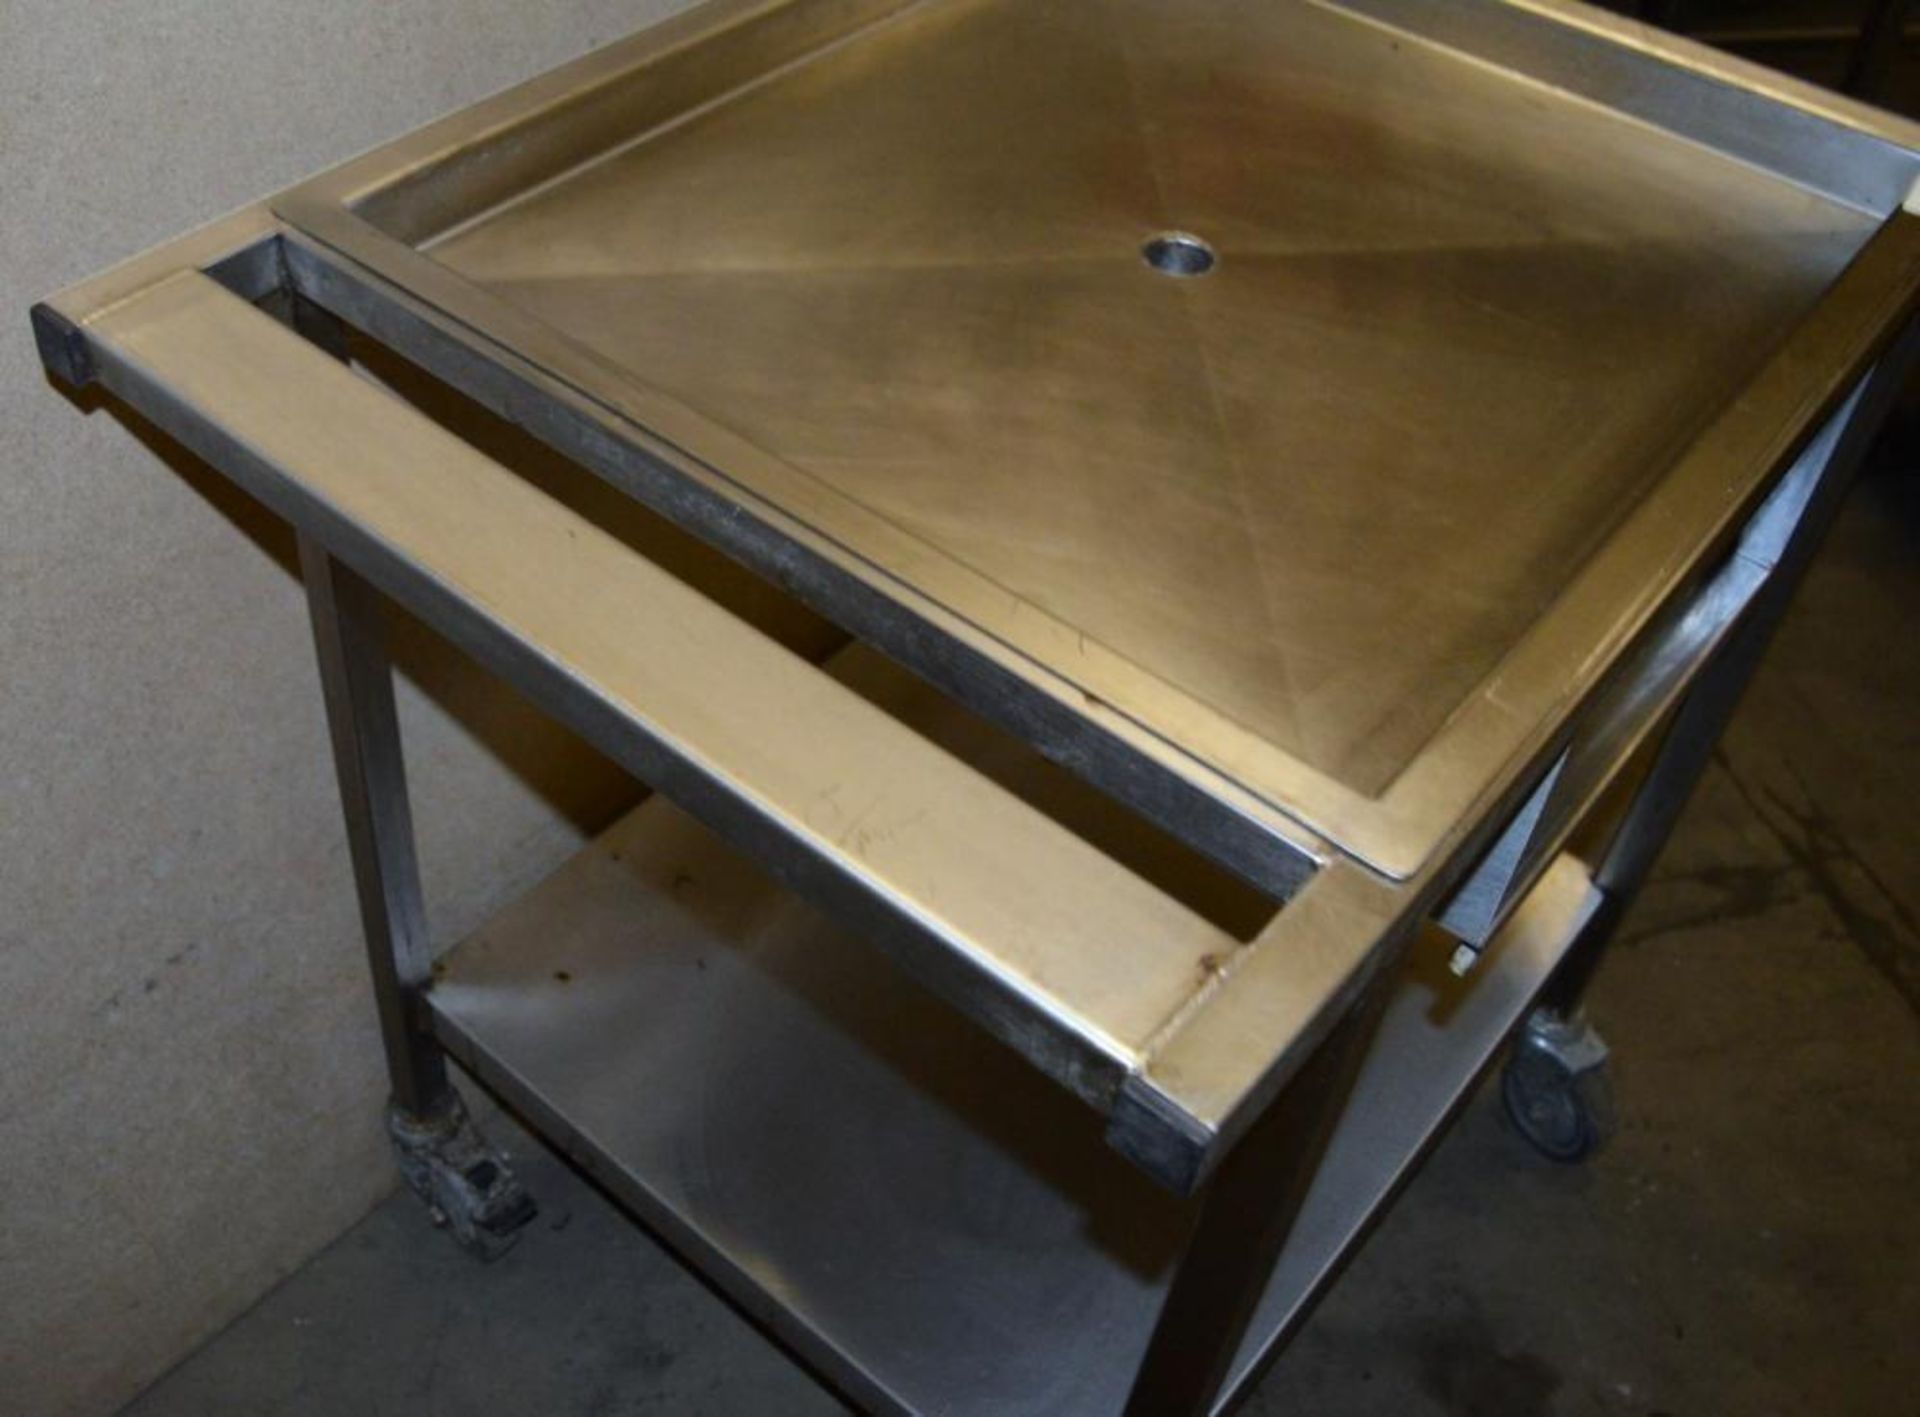 1 x Wheeled Stainless Steel Prep Bench with Drain Hole - Dimensions: 81.5 x 60.5 x 88cm - Ref: J1002 - Image 4 of 4